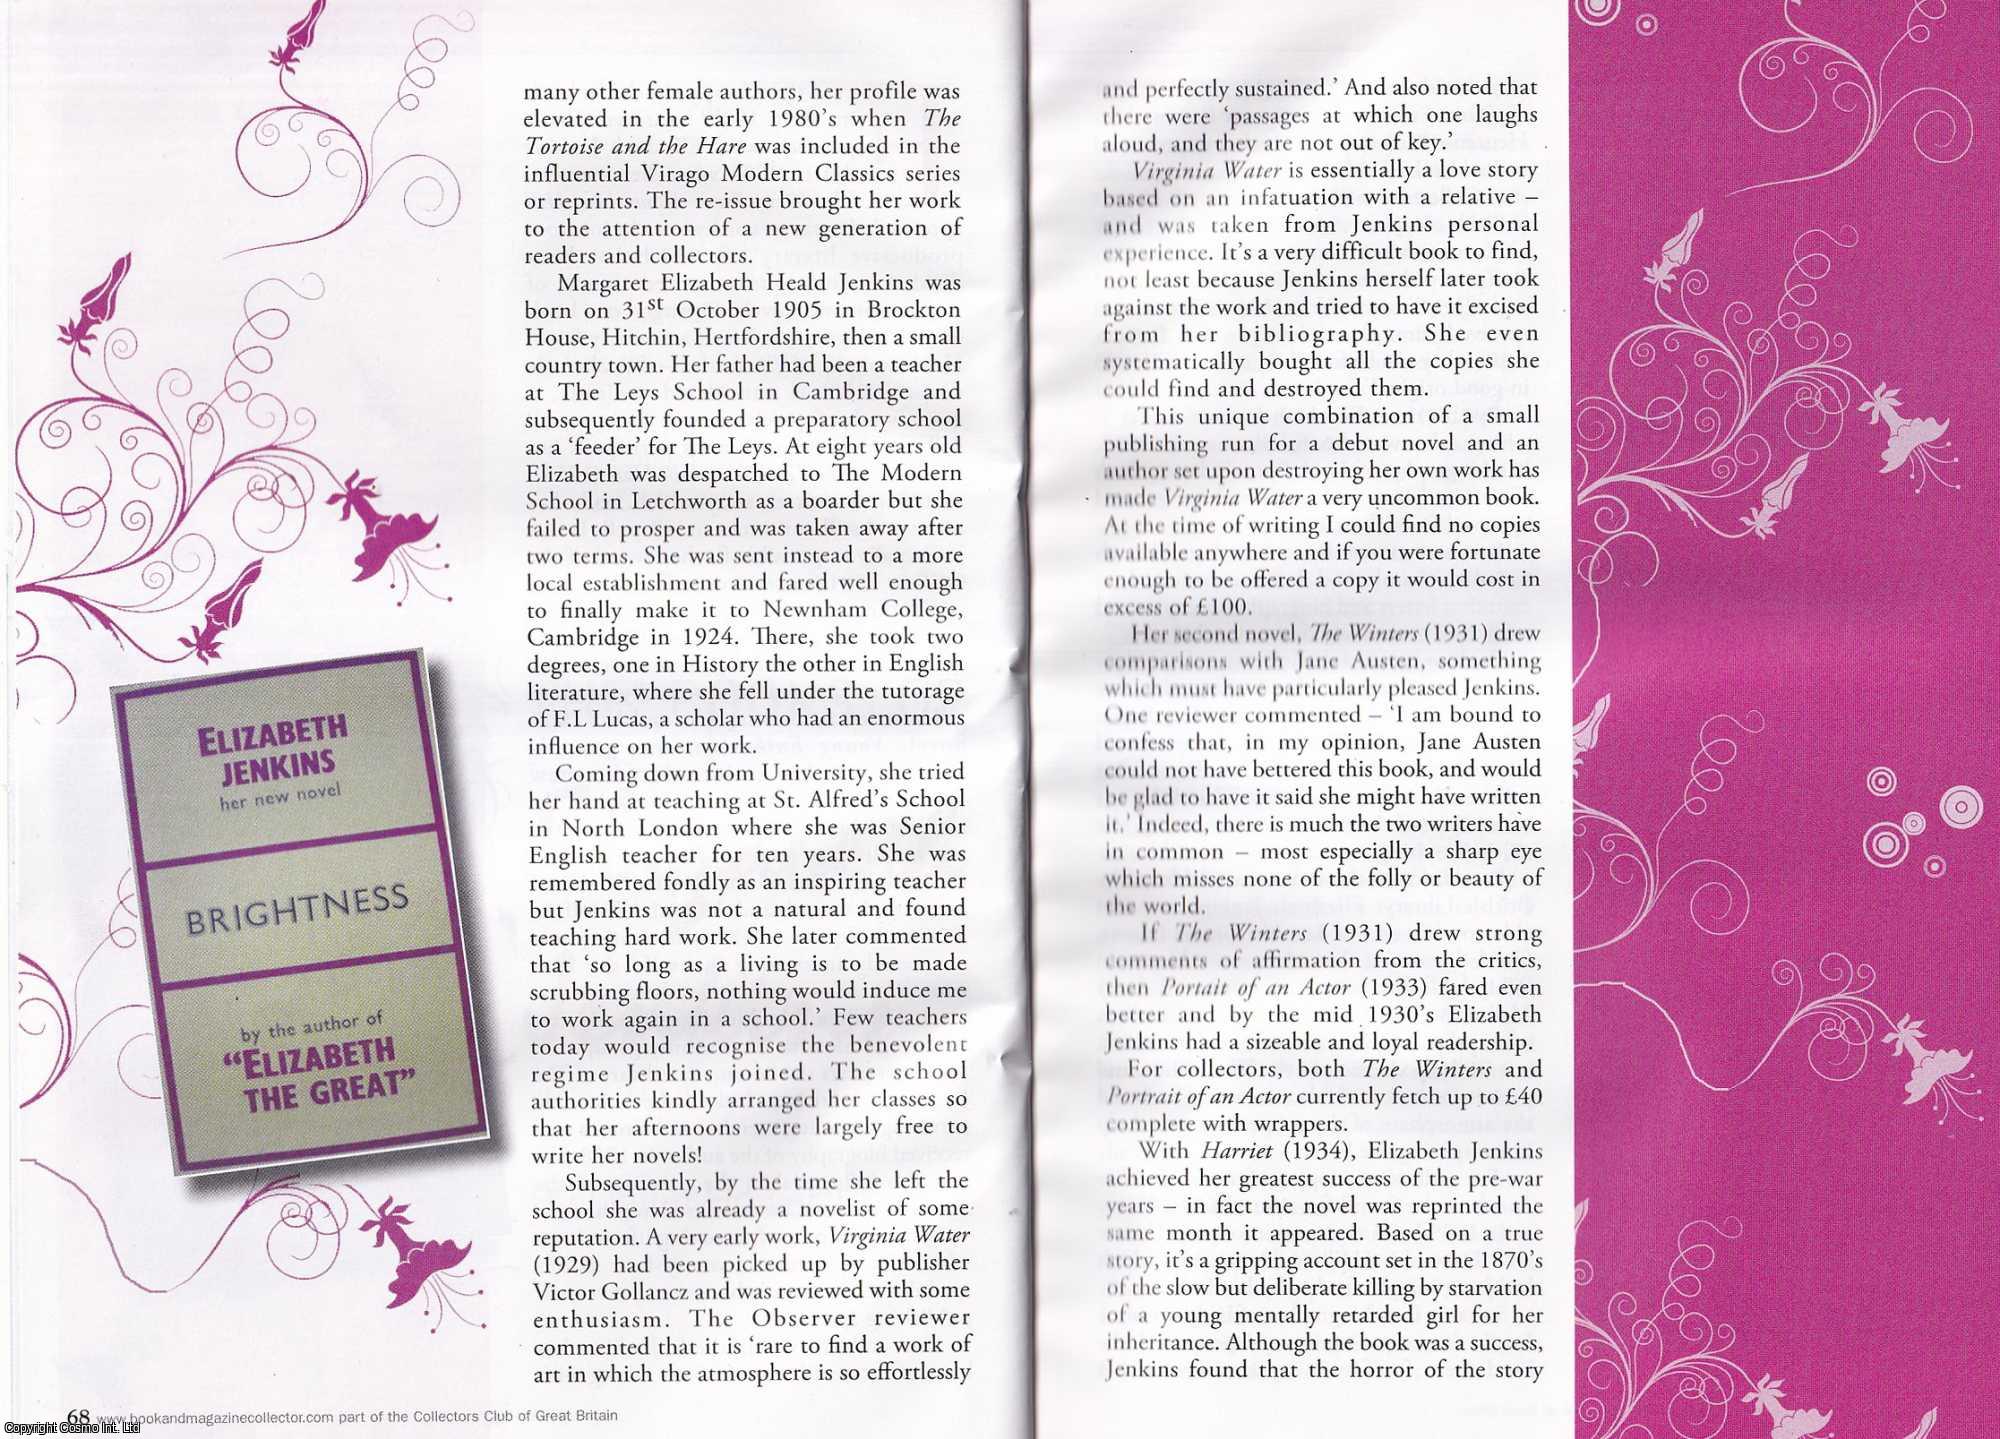 David Howard - The Books of Elizabeth Jenkins. This is an original article separated from an issue of The Book & Magazine Collector publication, 2009.